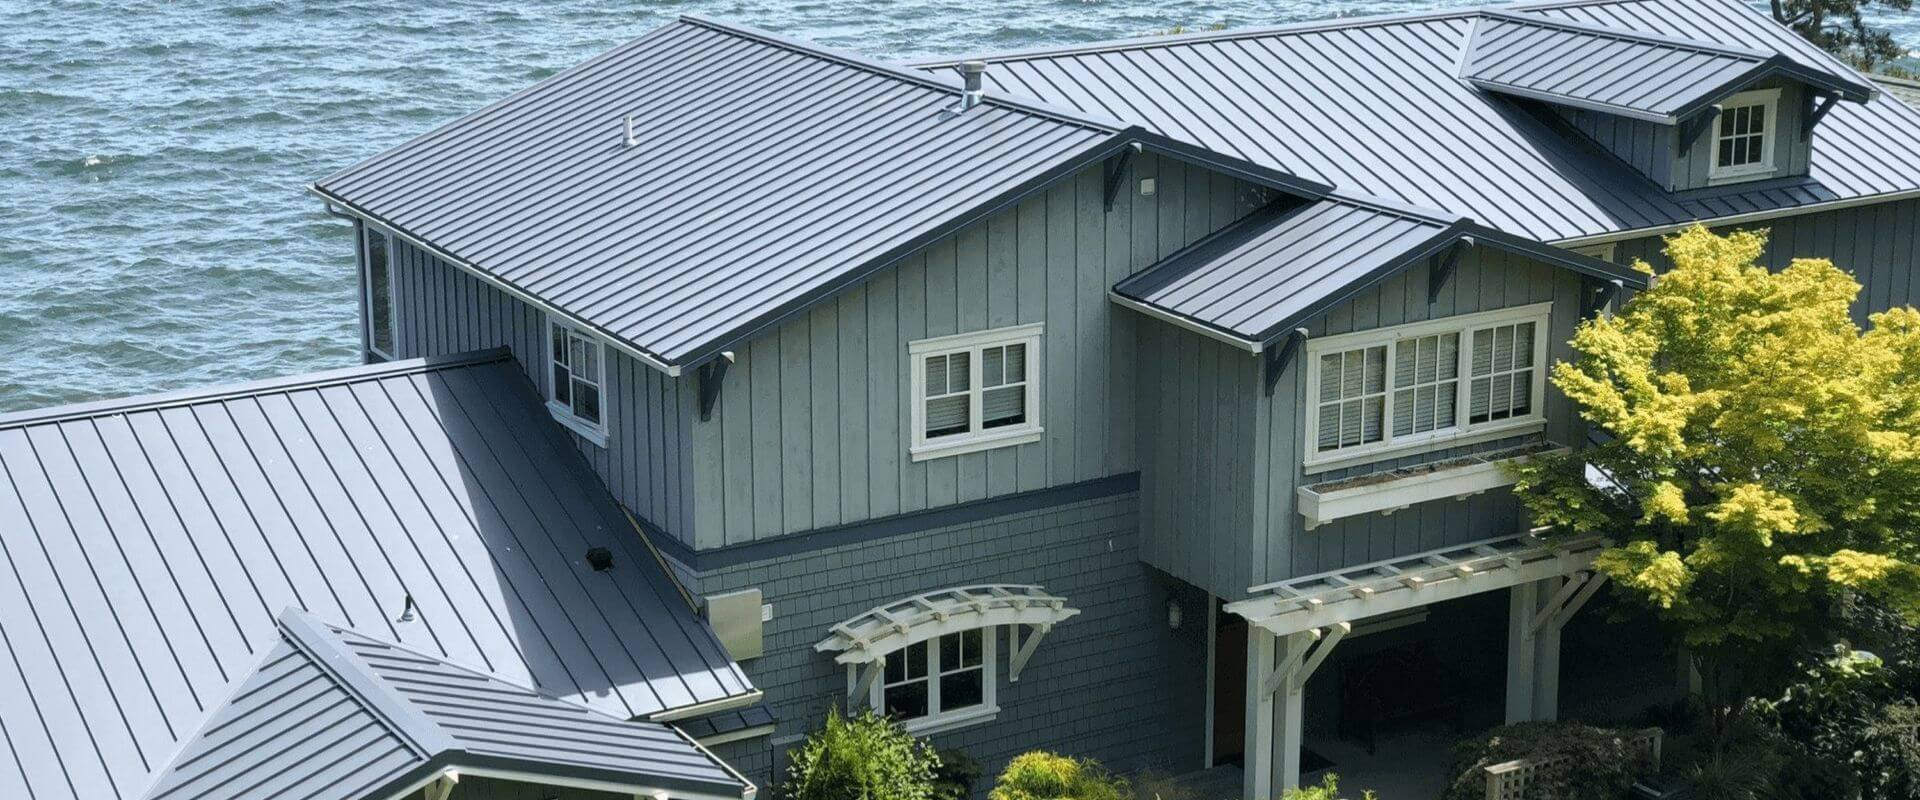 front view of home with a blue standing seam metal roof